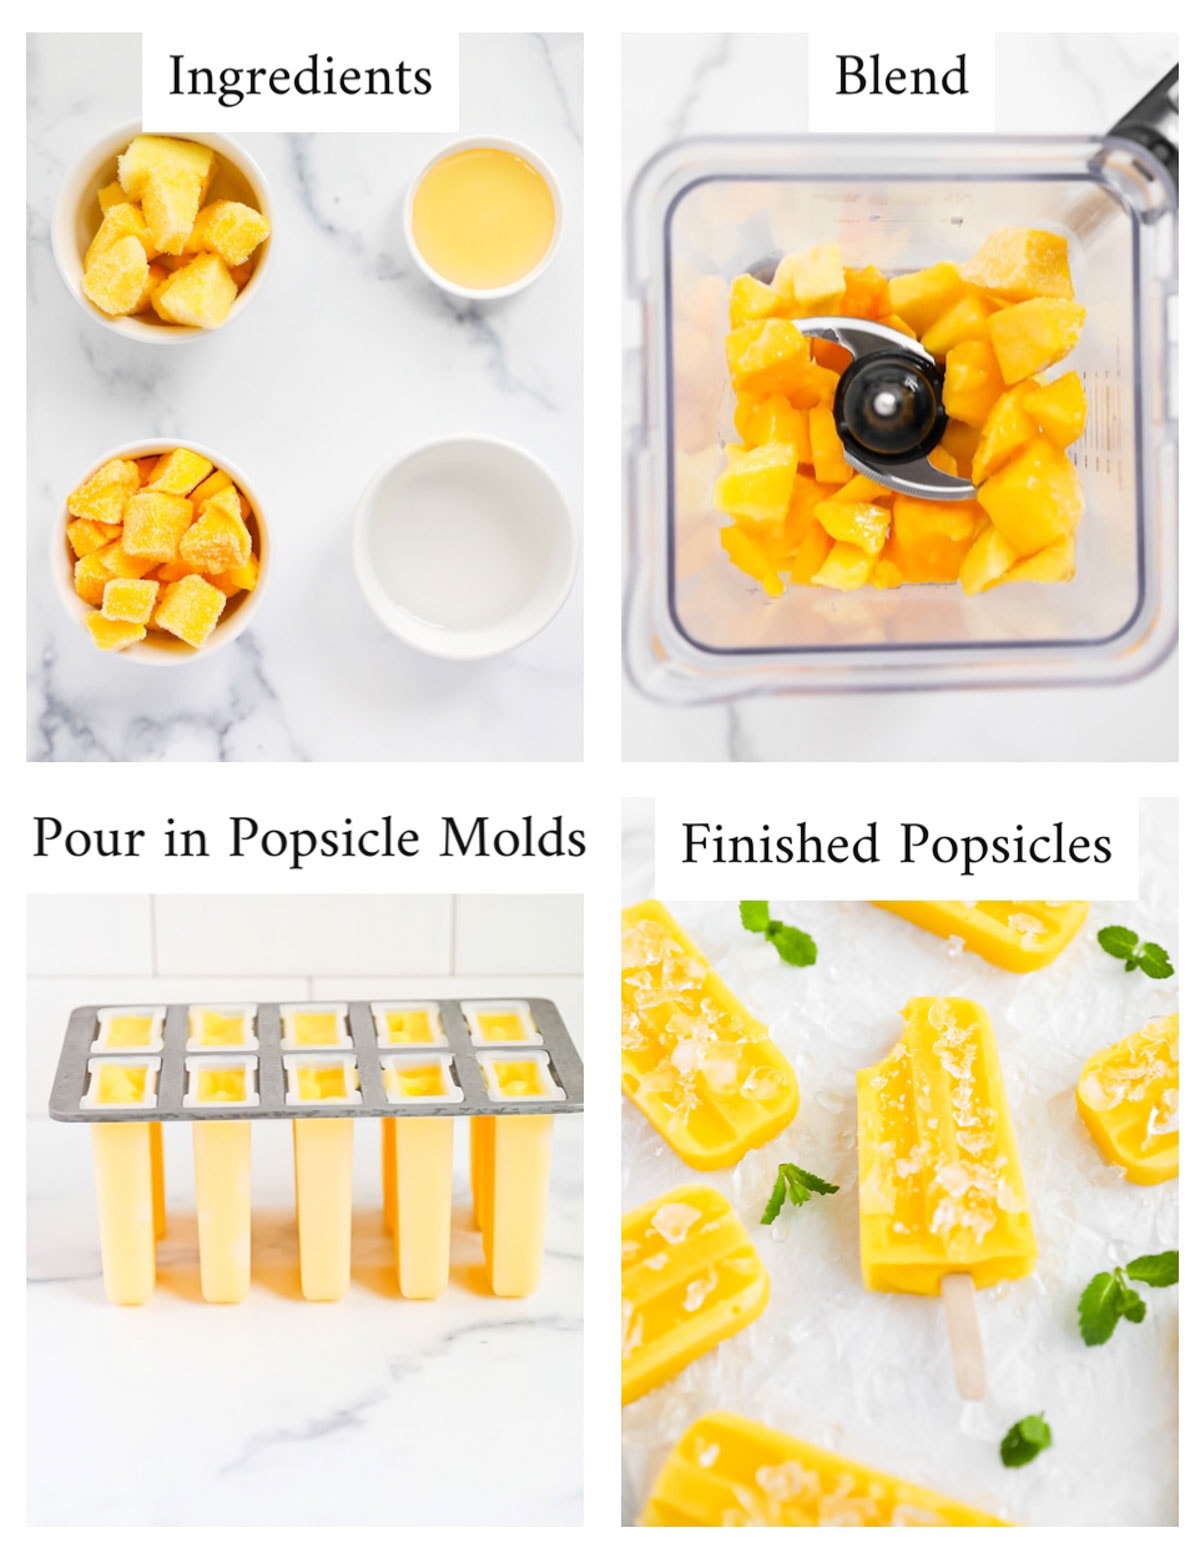 step by step pictures of making homemade popsicles. the first picture shows the ingredients, the second is the ingredients in a blender, the third is a popsicle mold filled with the mixture, and the last picture is the finished popsicles